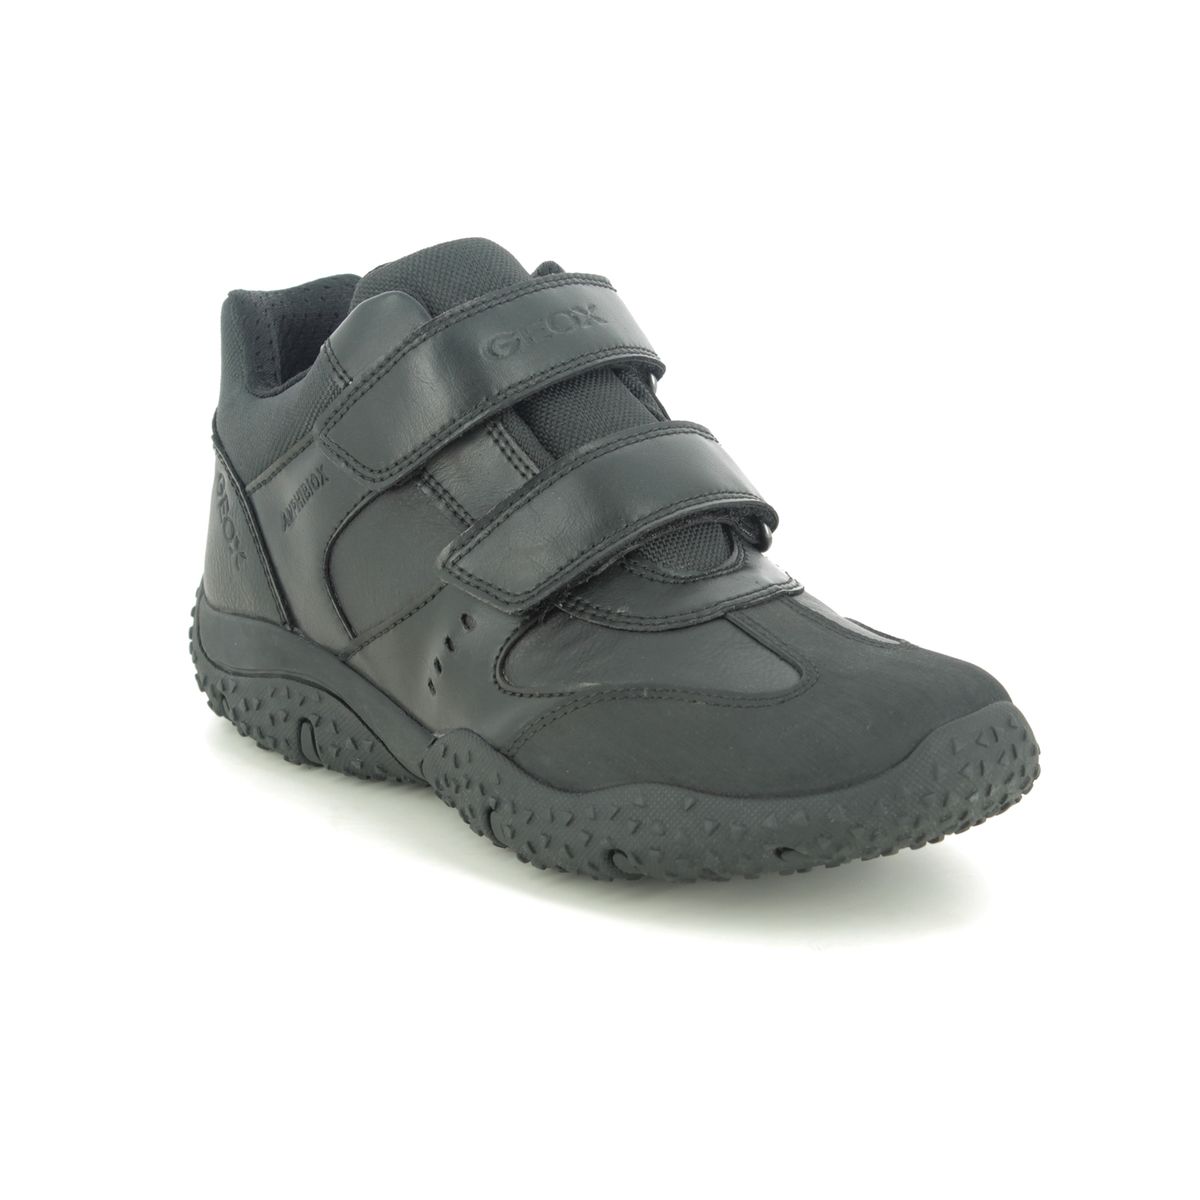 Geox - Baltic Boy Tex (Black Leather) J0442A-C9999 In Size 39 In Plain Black Leather For School For kids